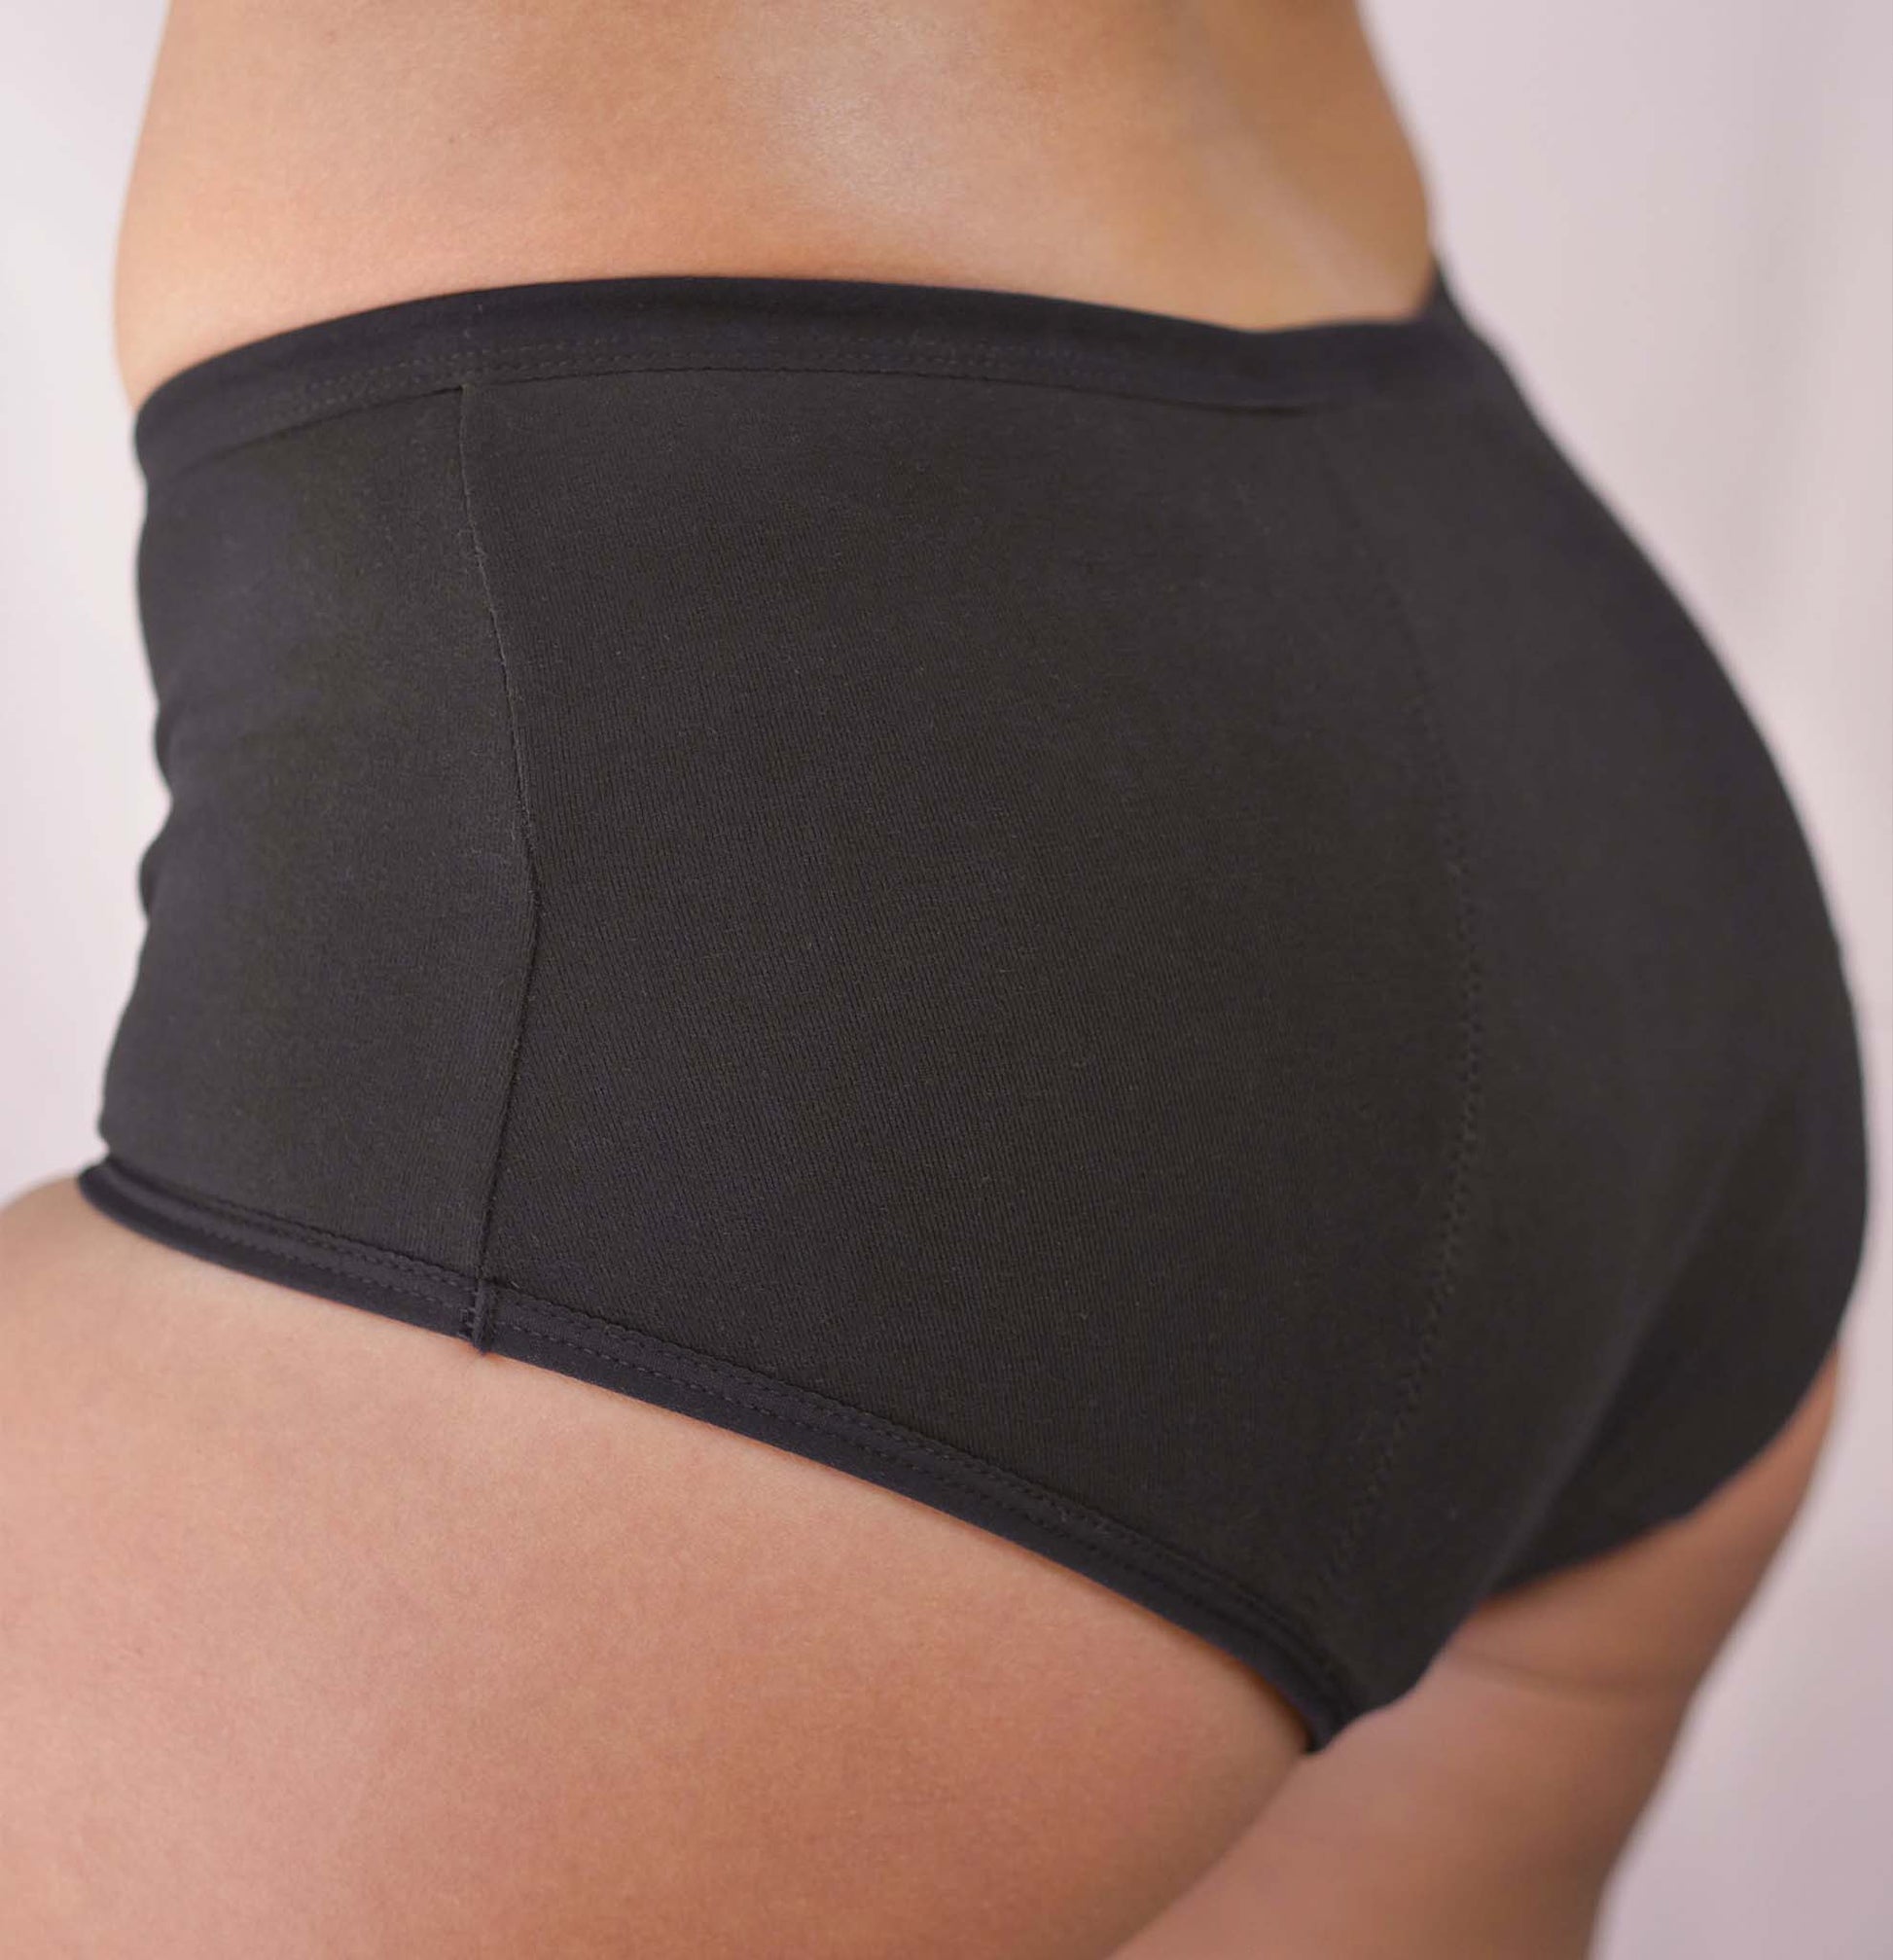 Period Underwear Cotton Full Brief in Ultra Heavy Absorbency - up to 6 tampons - MyNickerBot